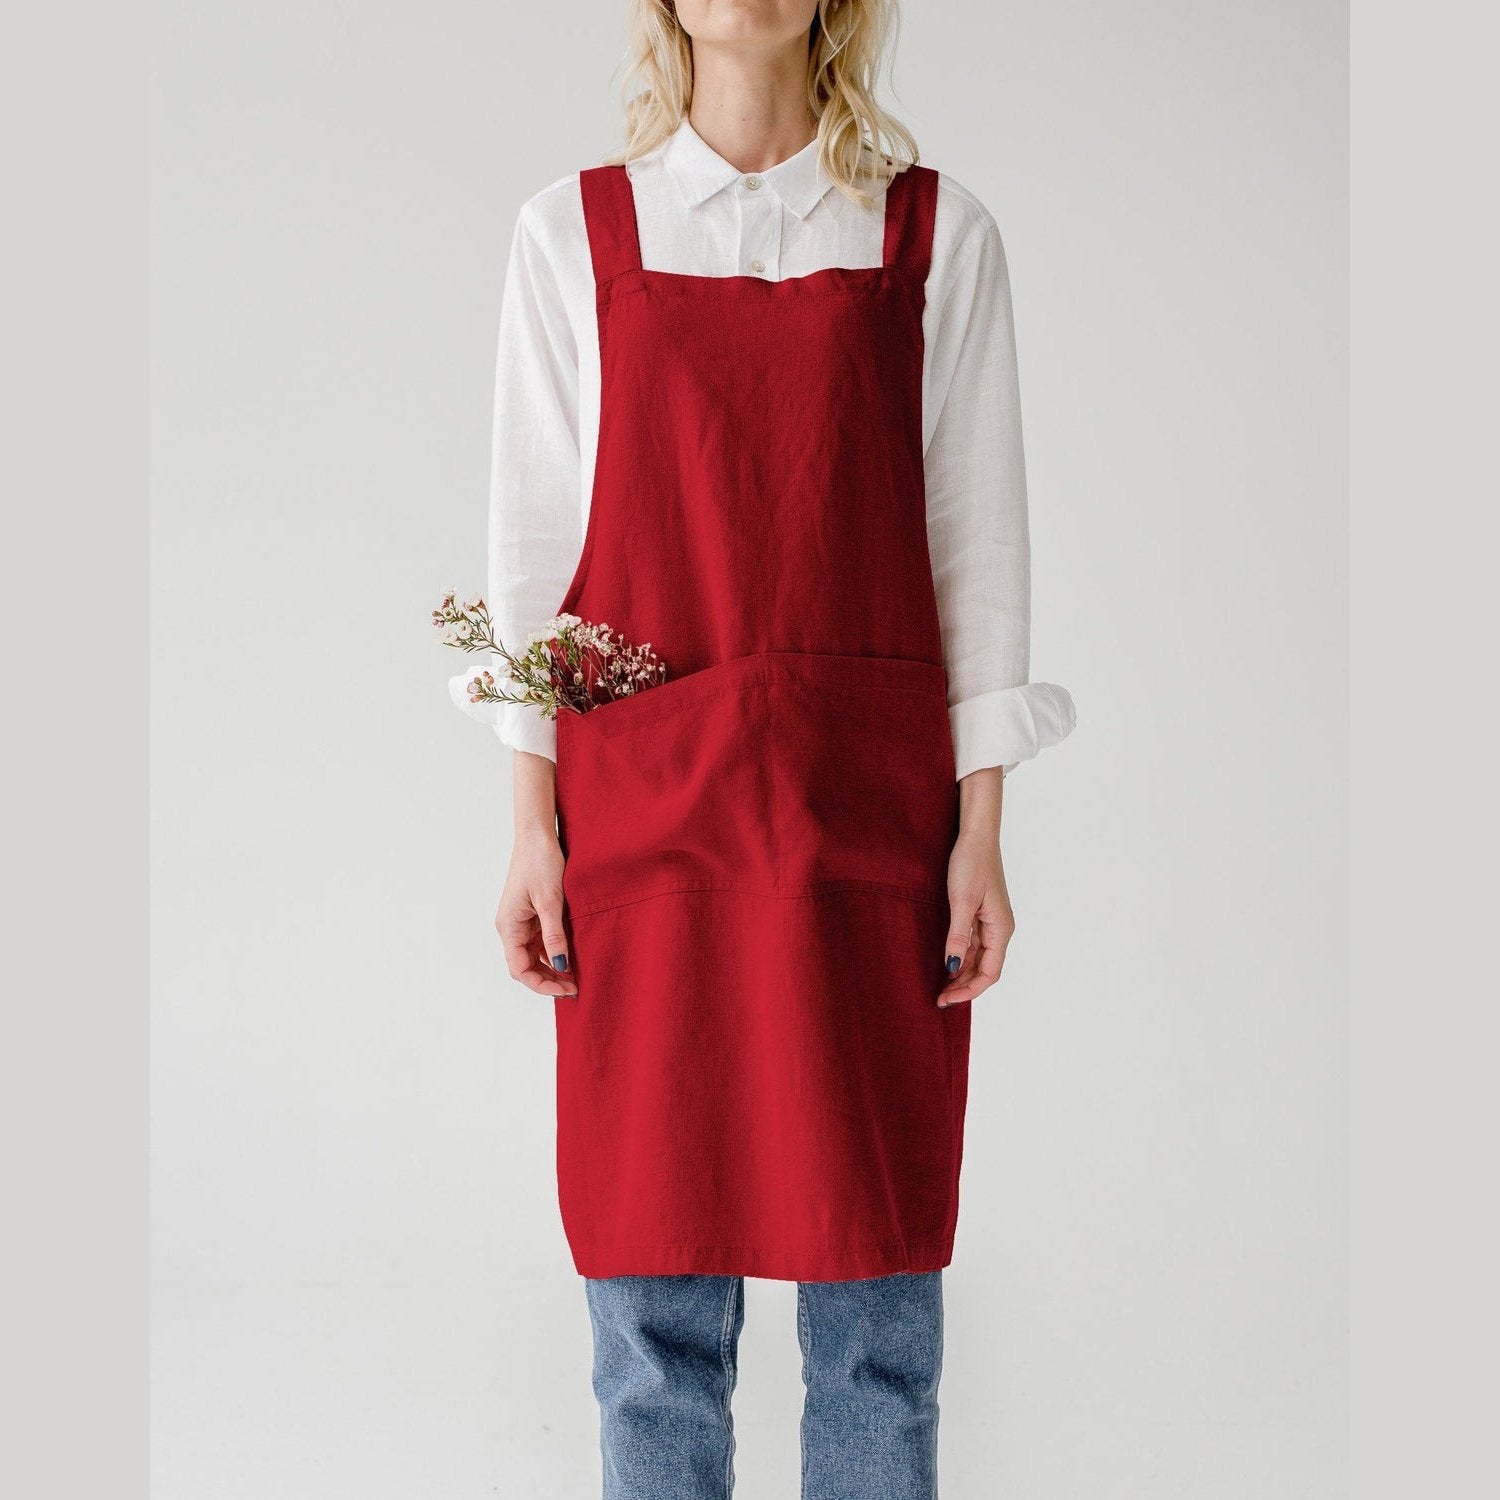 Crossback Apron - Red Pear